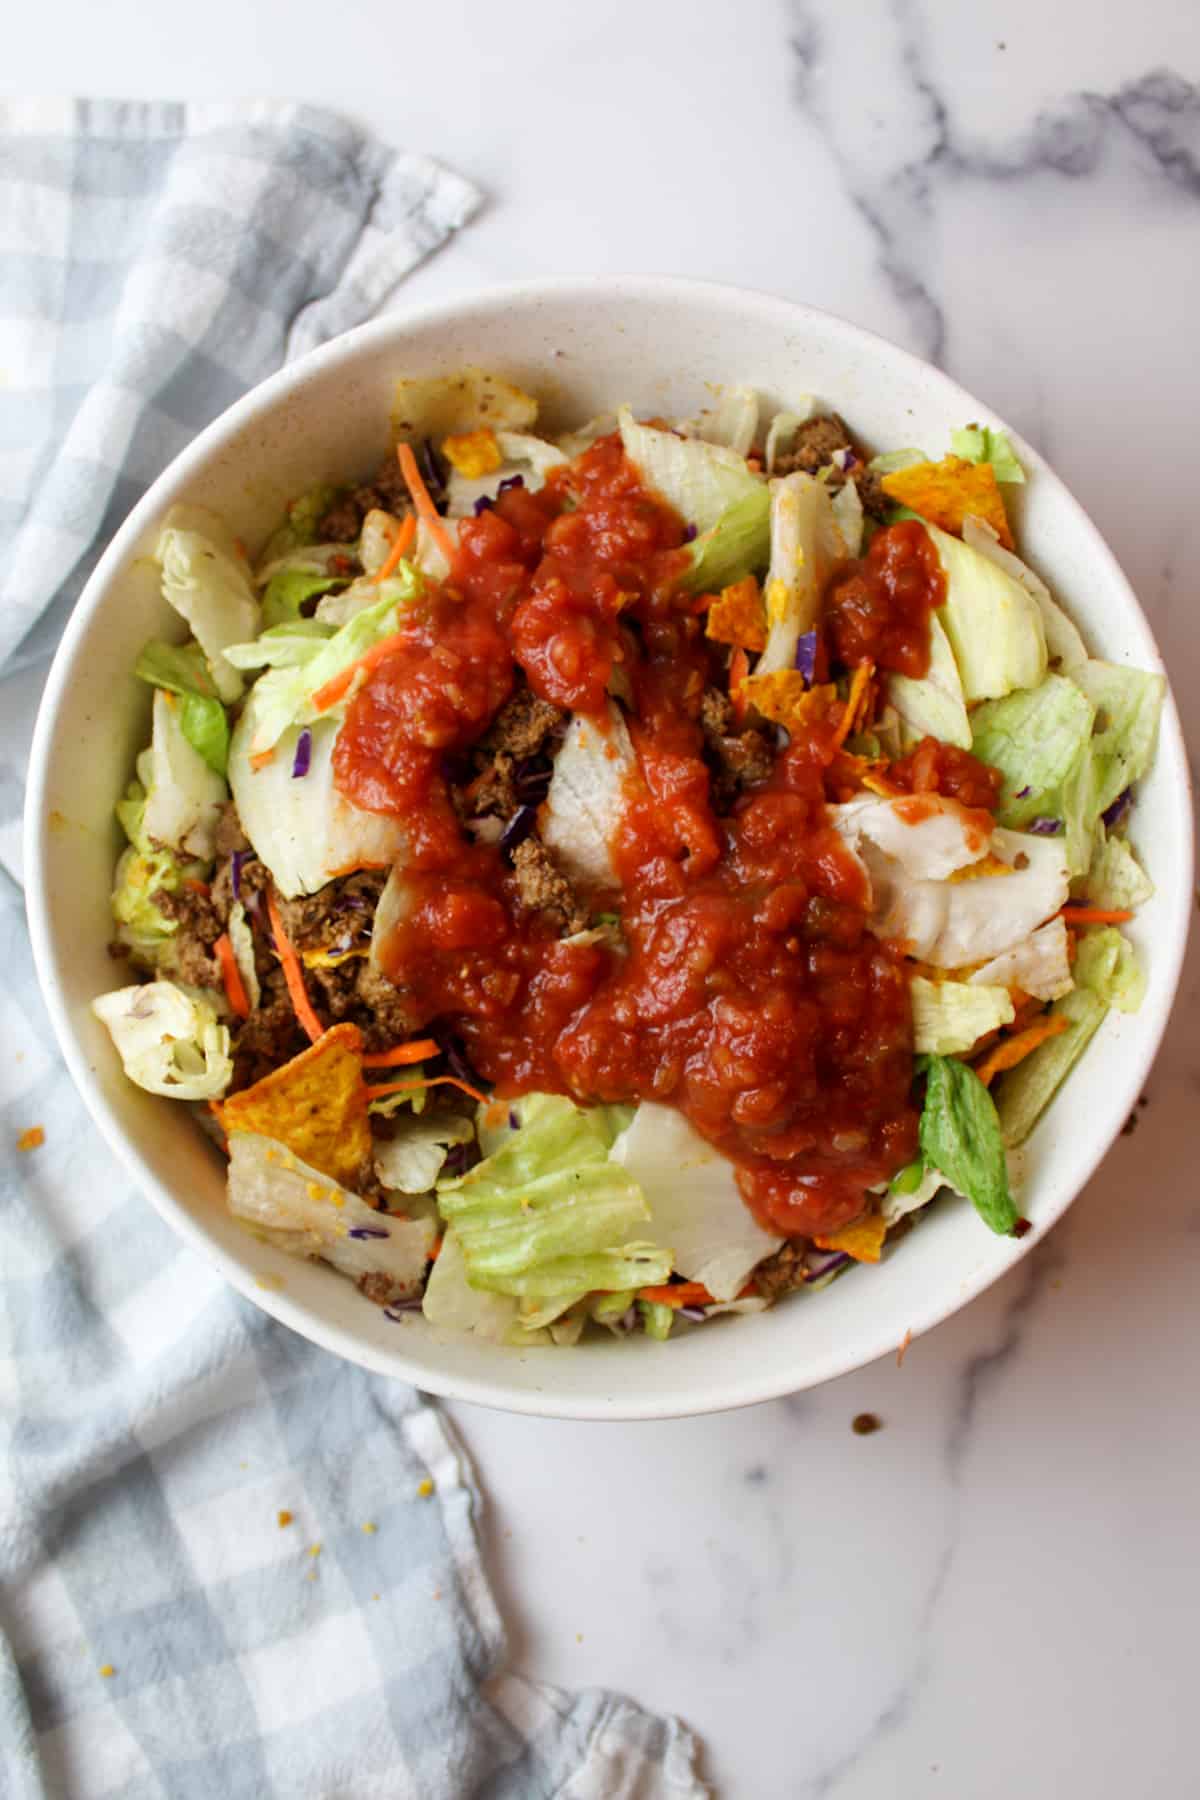 salsa over a salad fillwed with green lettuce, taco meat and crushed doritos chips